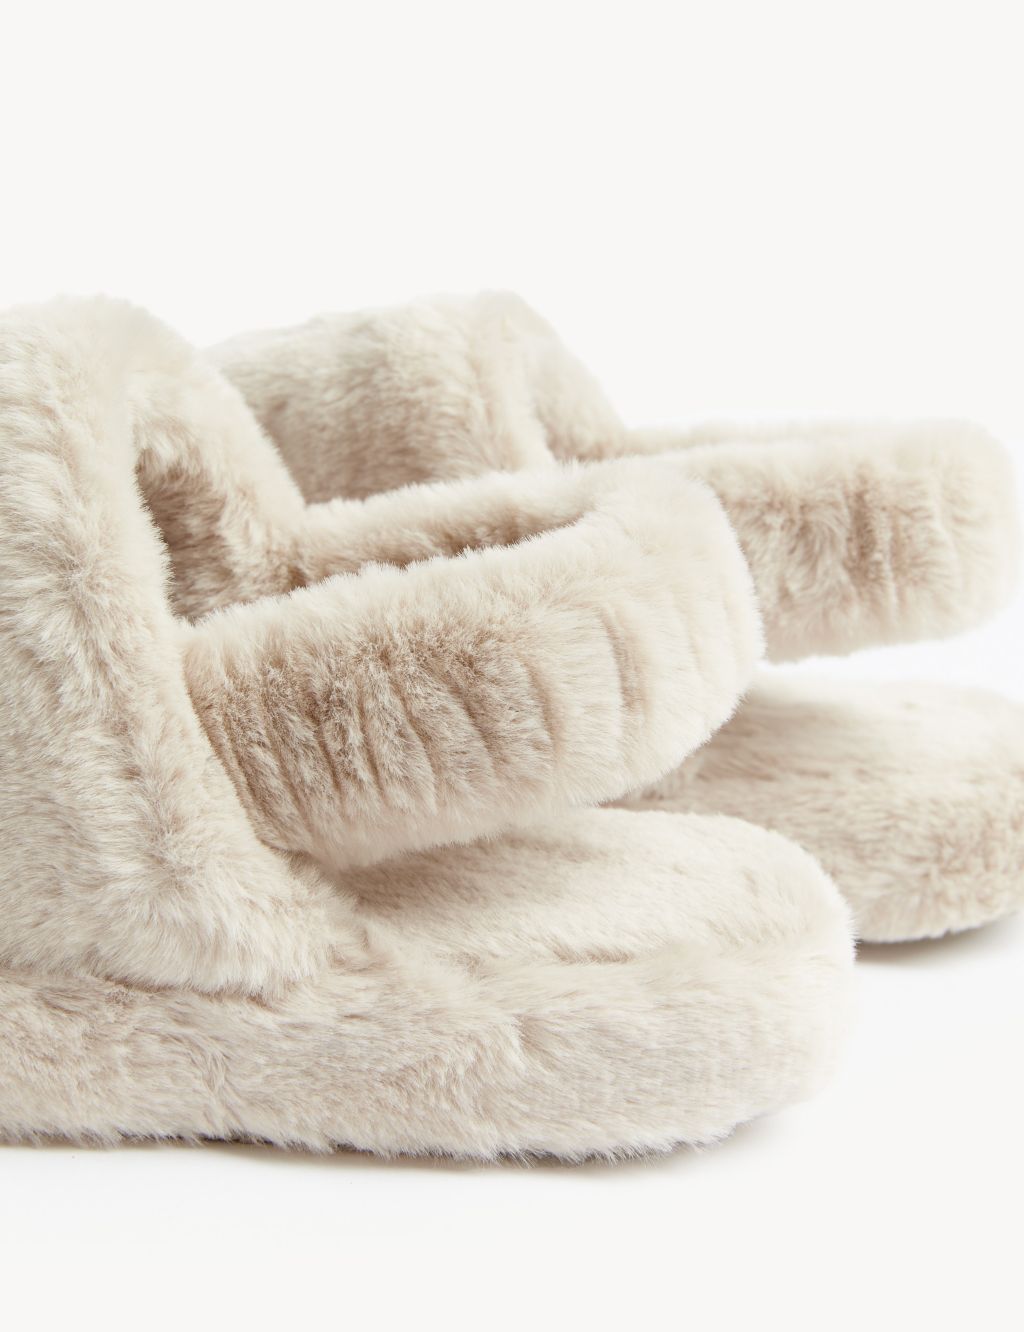 Faux Fur Slippers with Freshfeet™ image 3